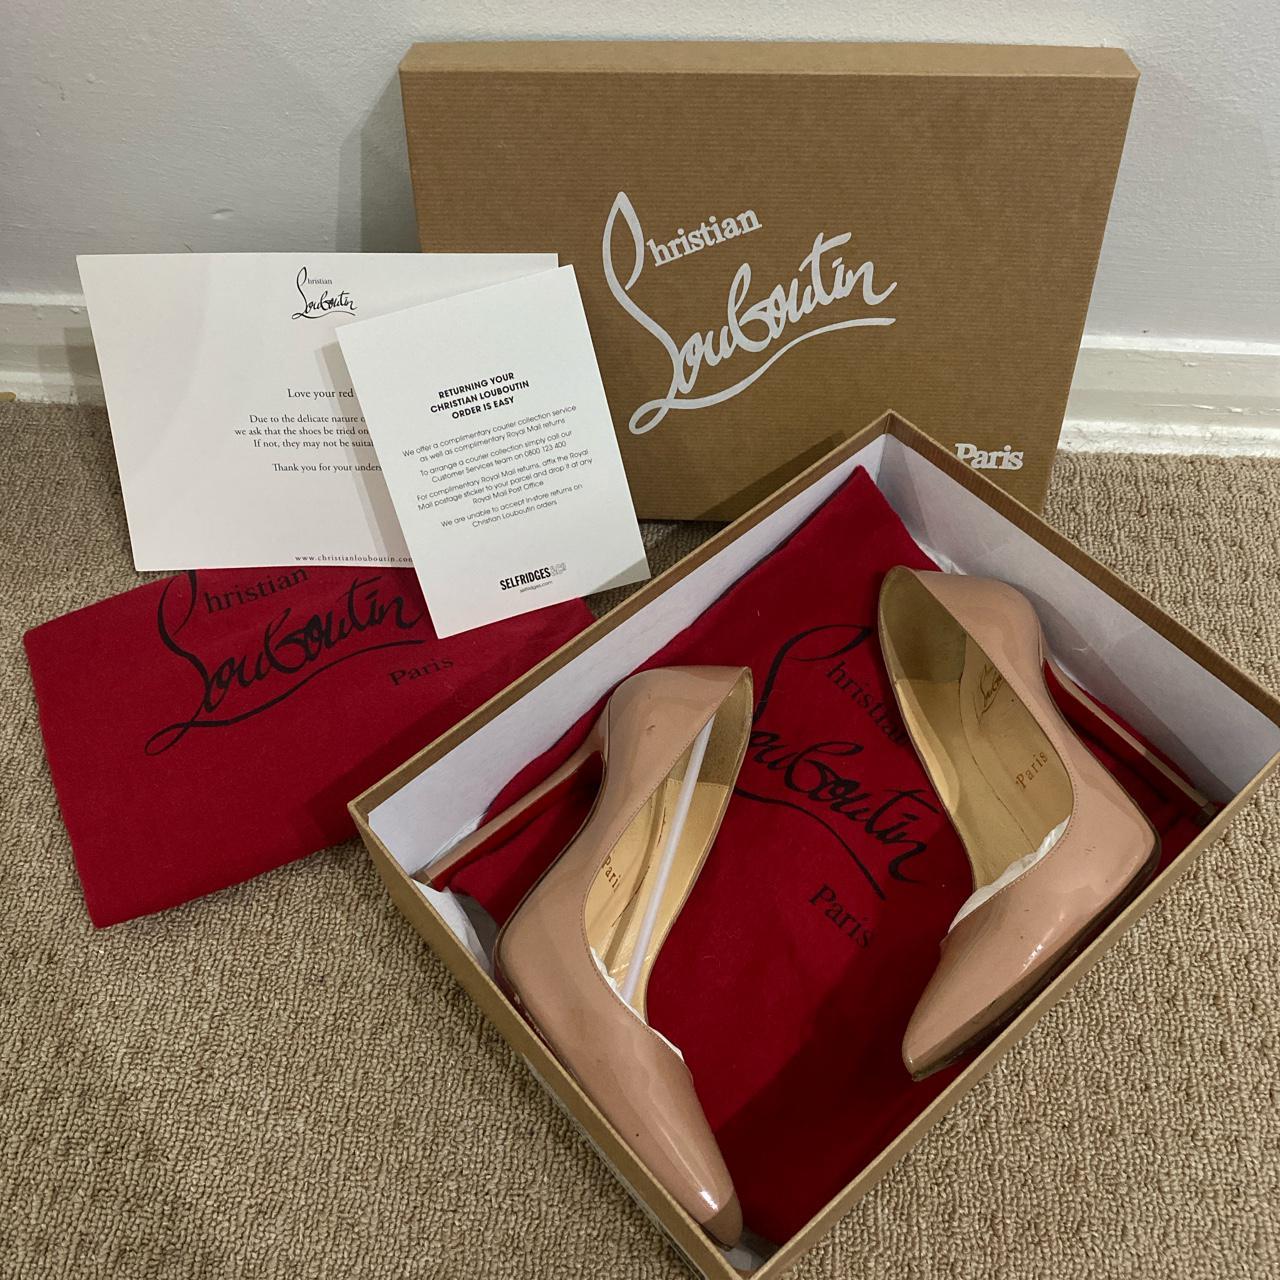 Louis Vuitton, Shoes, All Black Louis Vuitton Red Bottom Heels Size 4  Come With Box And Dust Bag